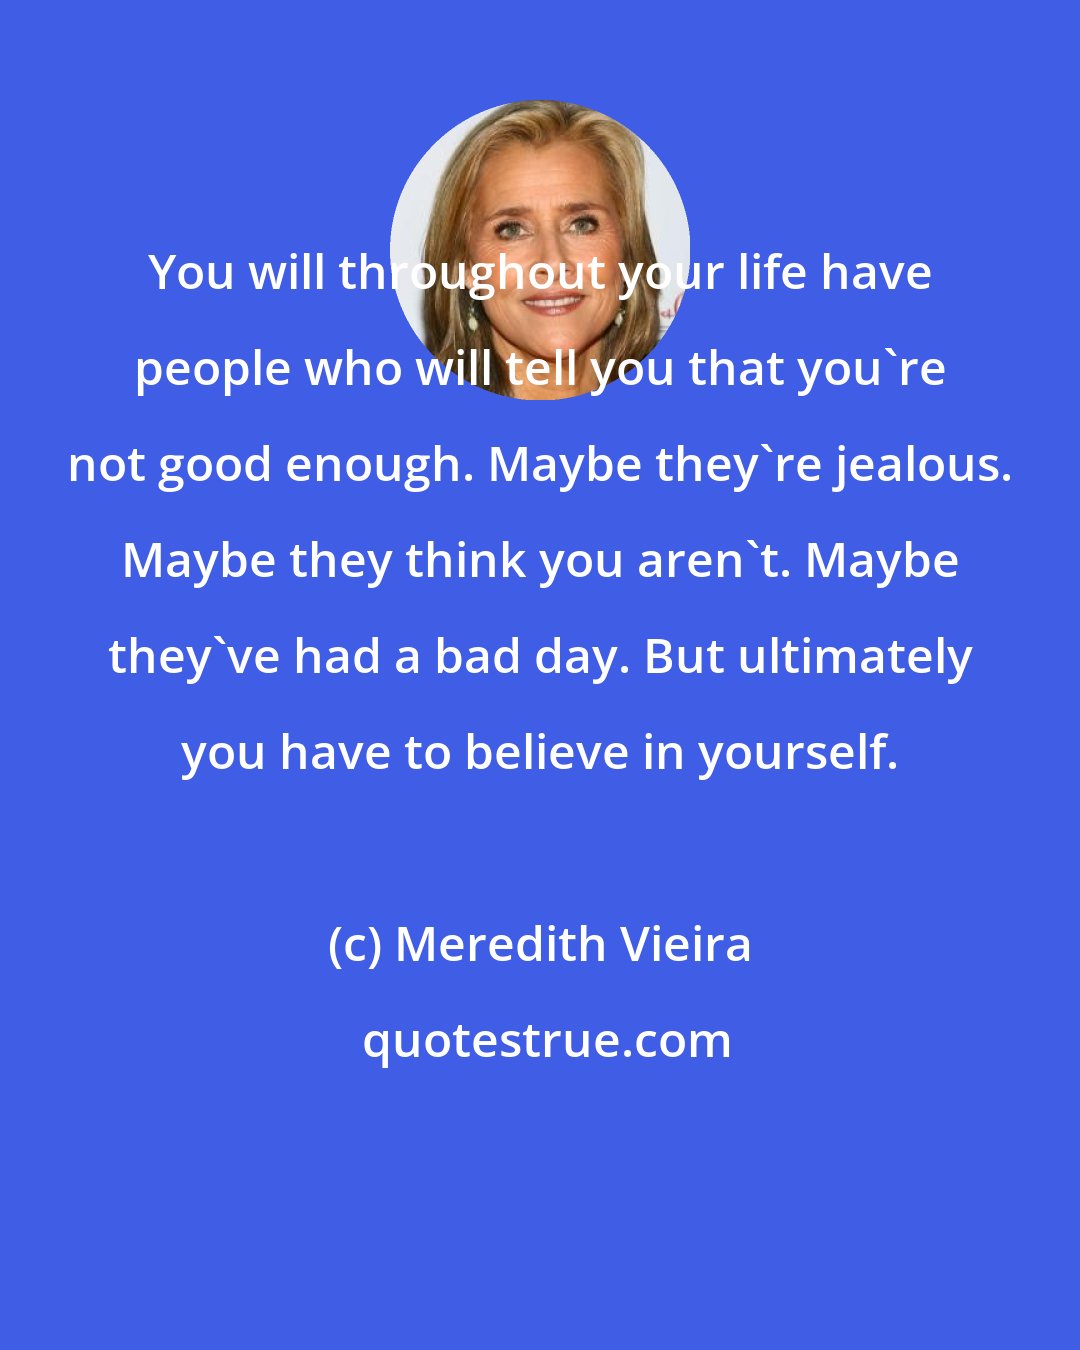 Meredith Vieira: You will throughout your life have people who will tell you that you're not good enough. Maybe they're jealous. Maybe they think you aren't. Maybe they've had a bad day. But ultimately you have to believe in yourself.